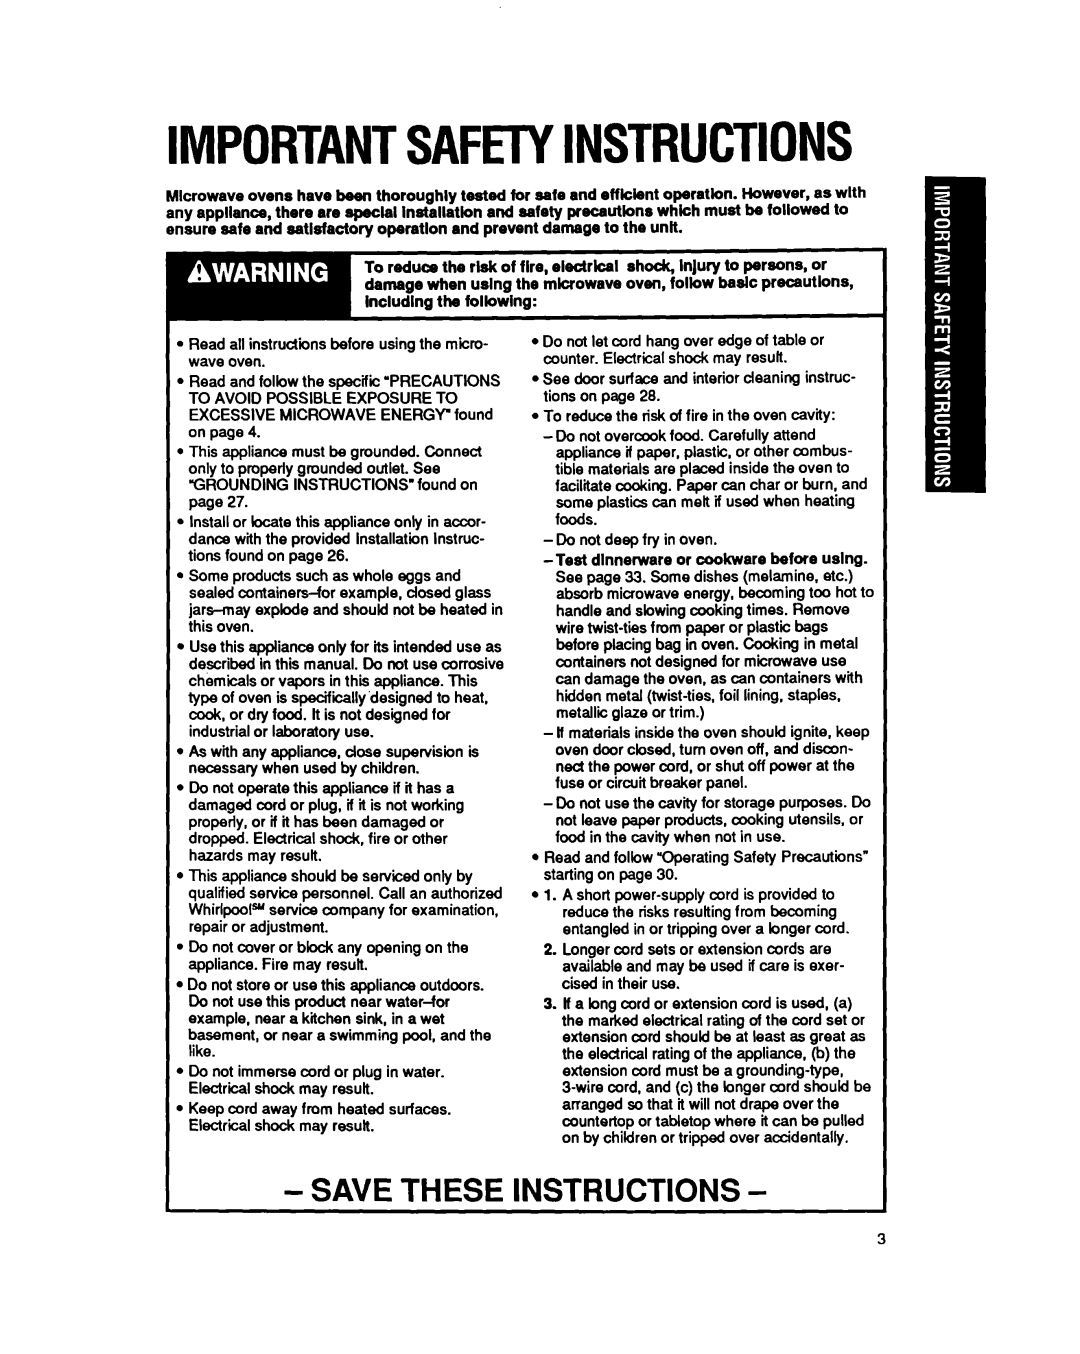 Whirlpool MB7120XY manual Importantsafetyinstructions, Save These Instructions 